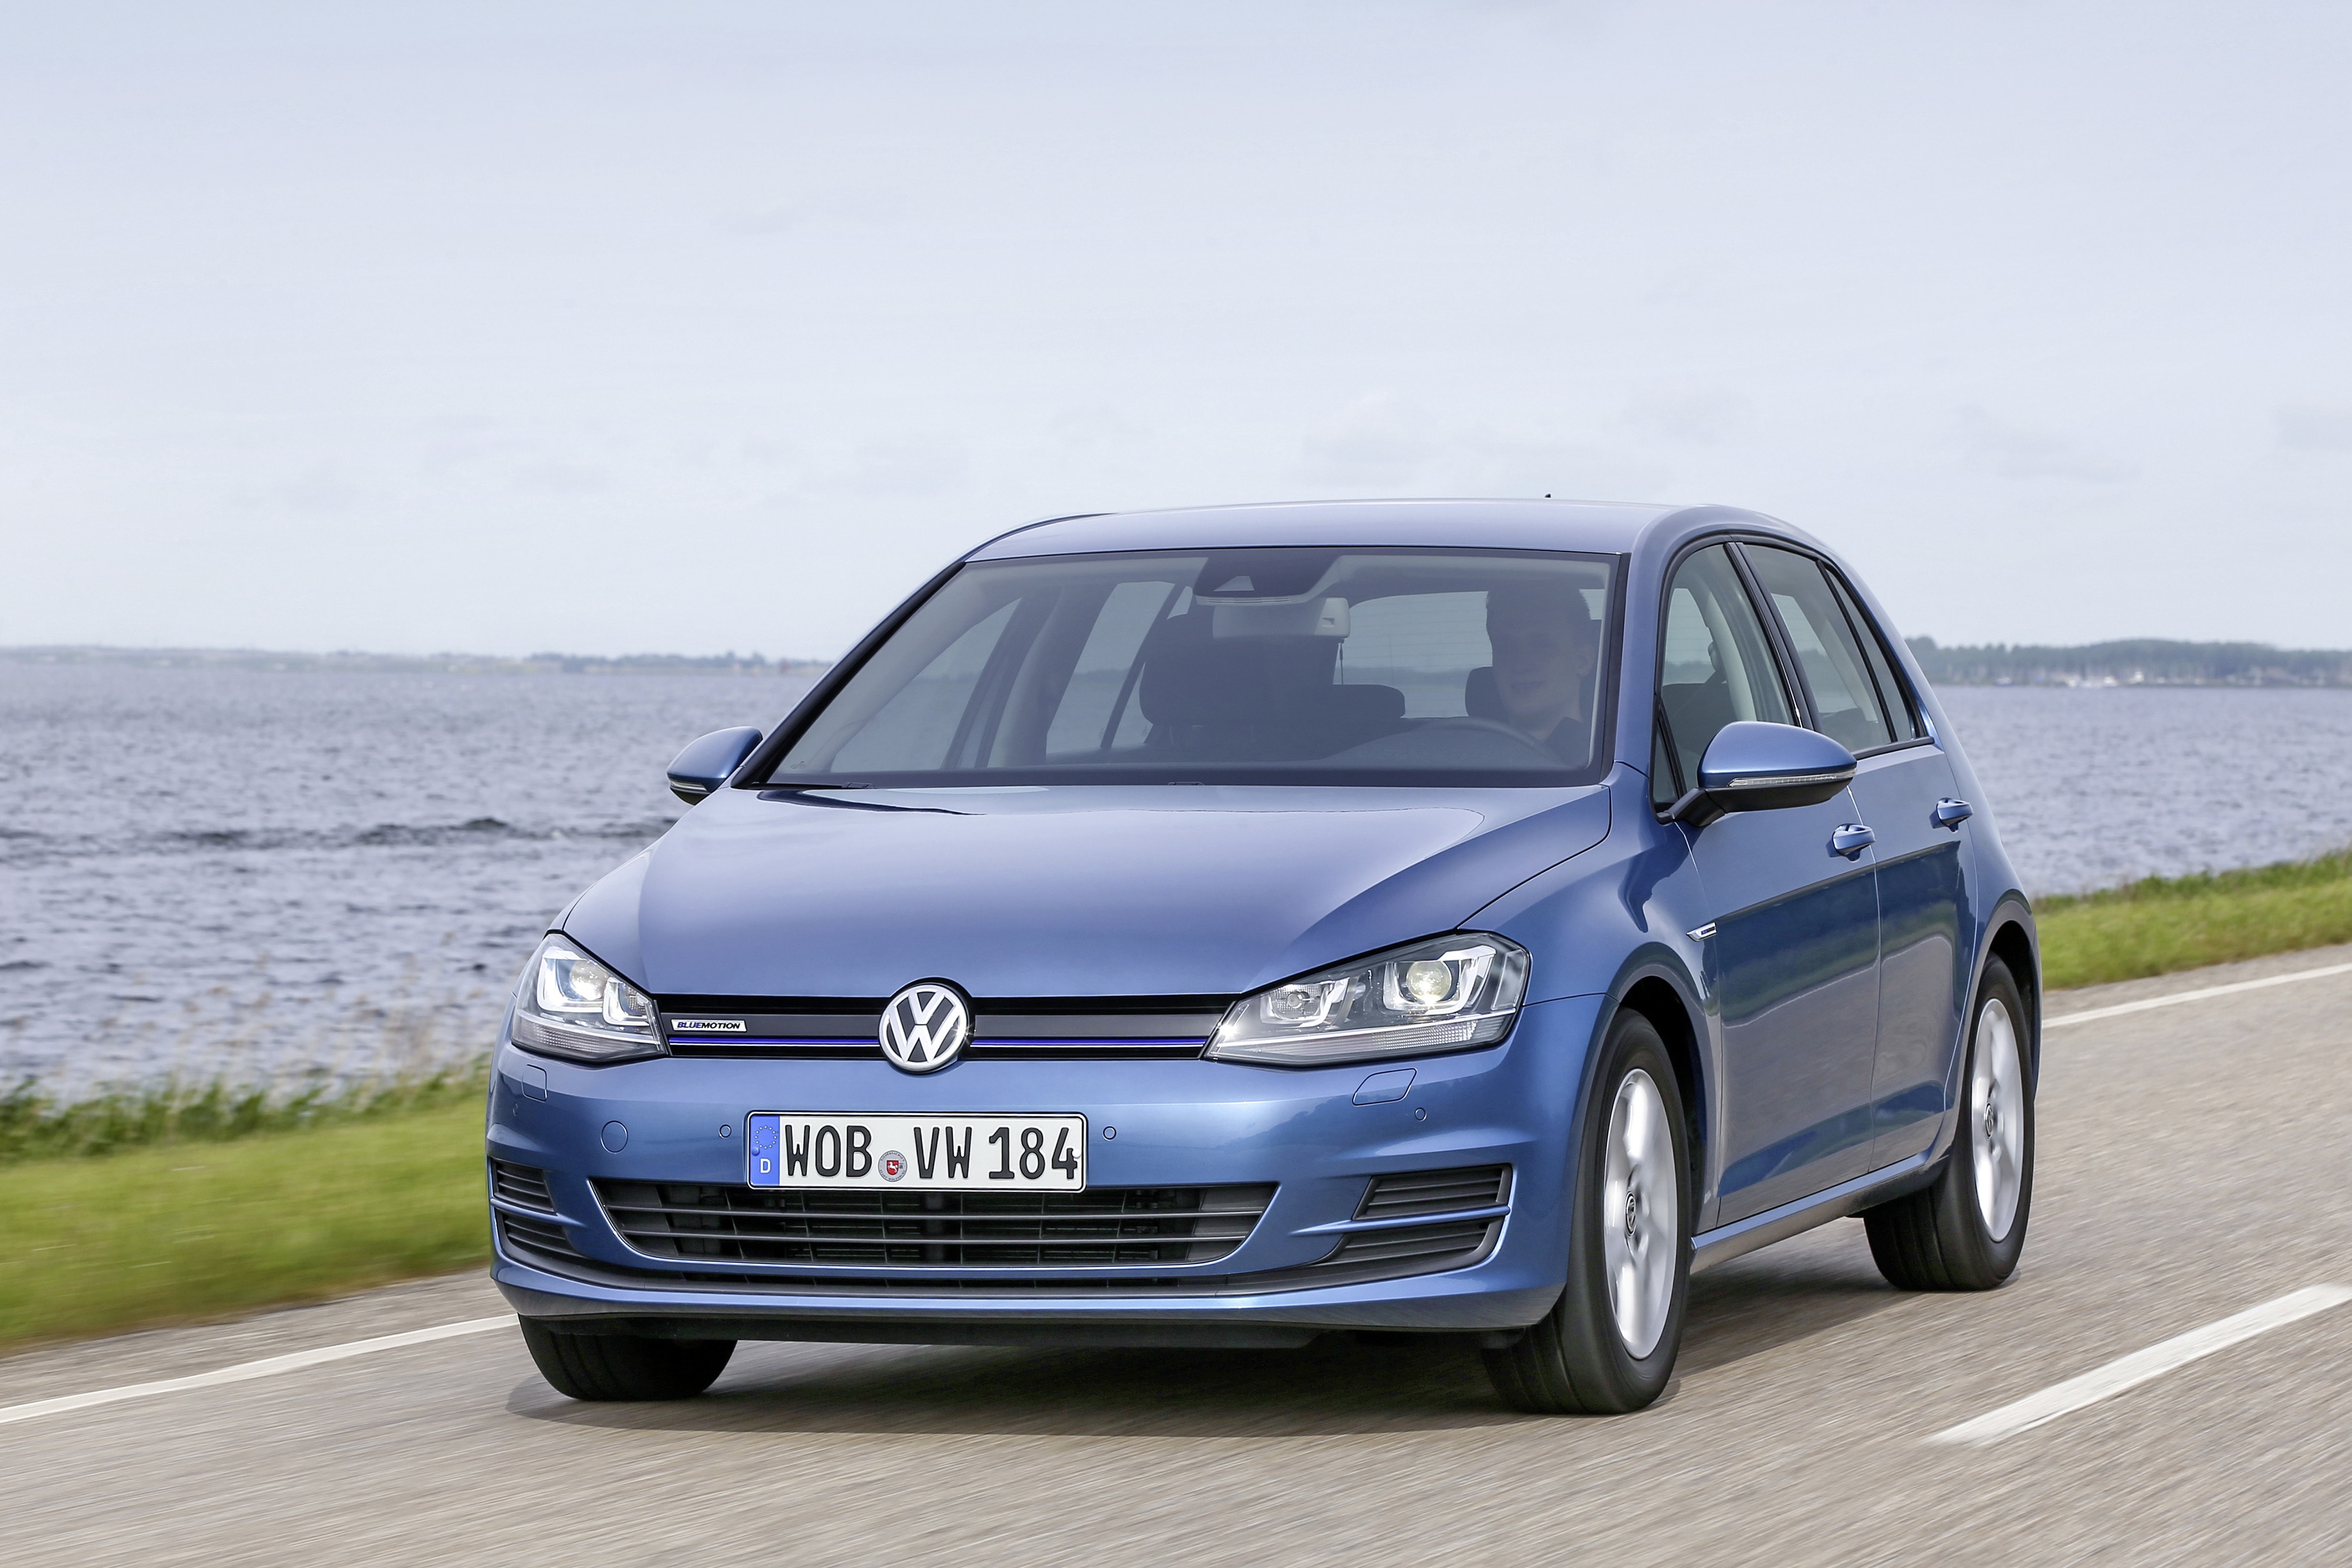 Volkswagen Golf 7's Facelift Expected to Be Launched This